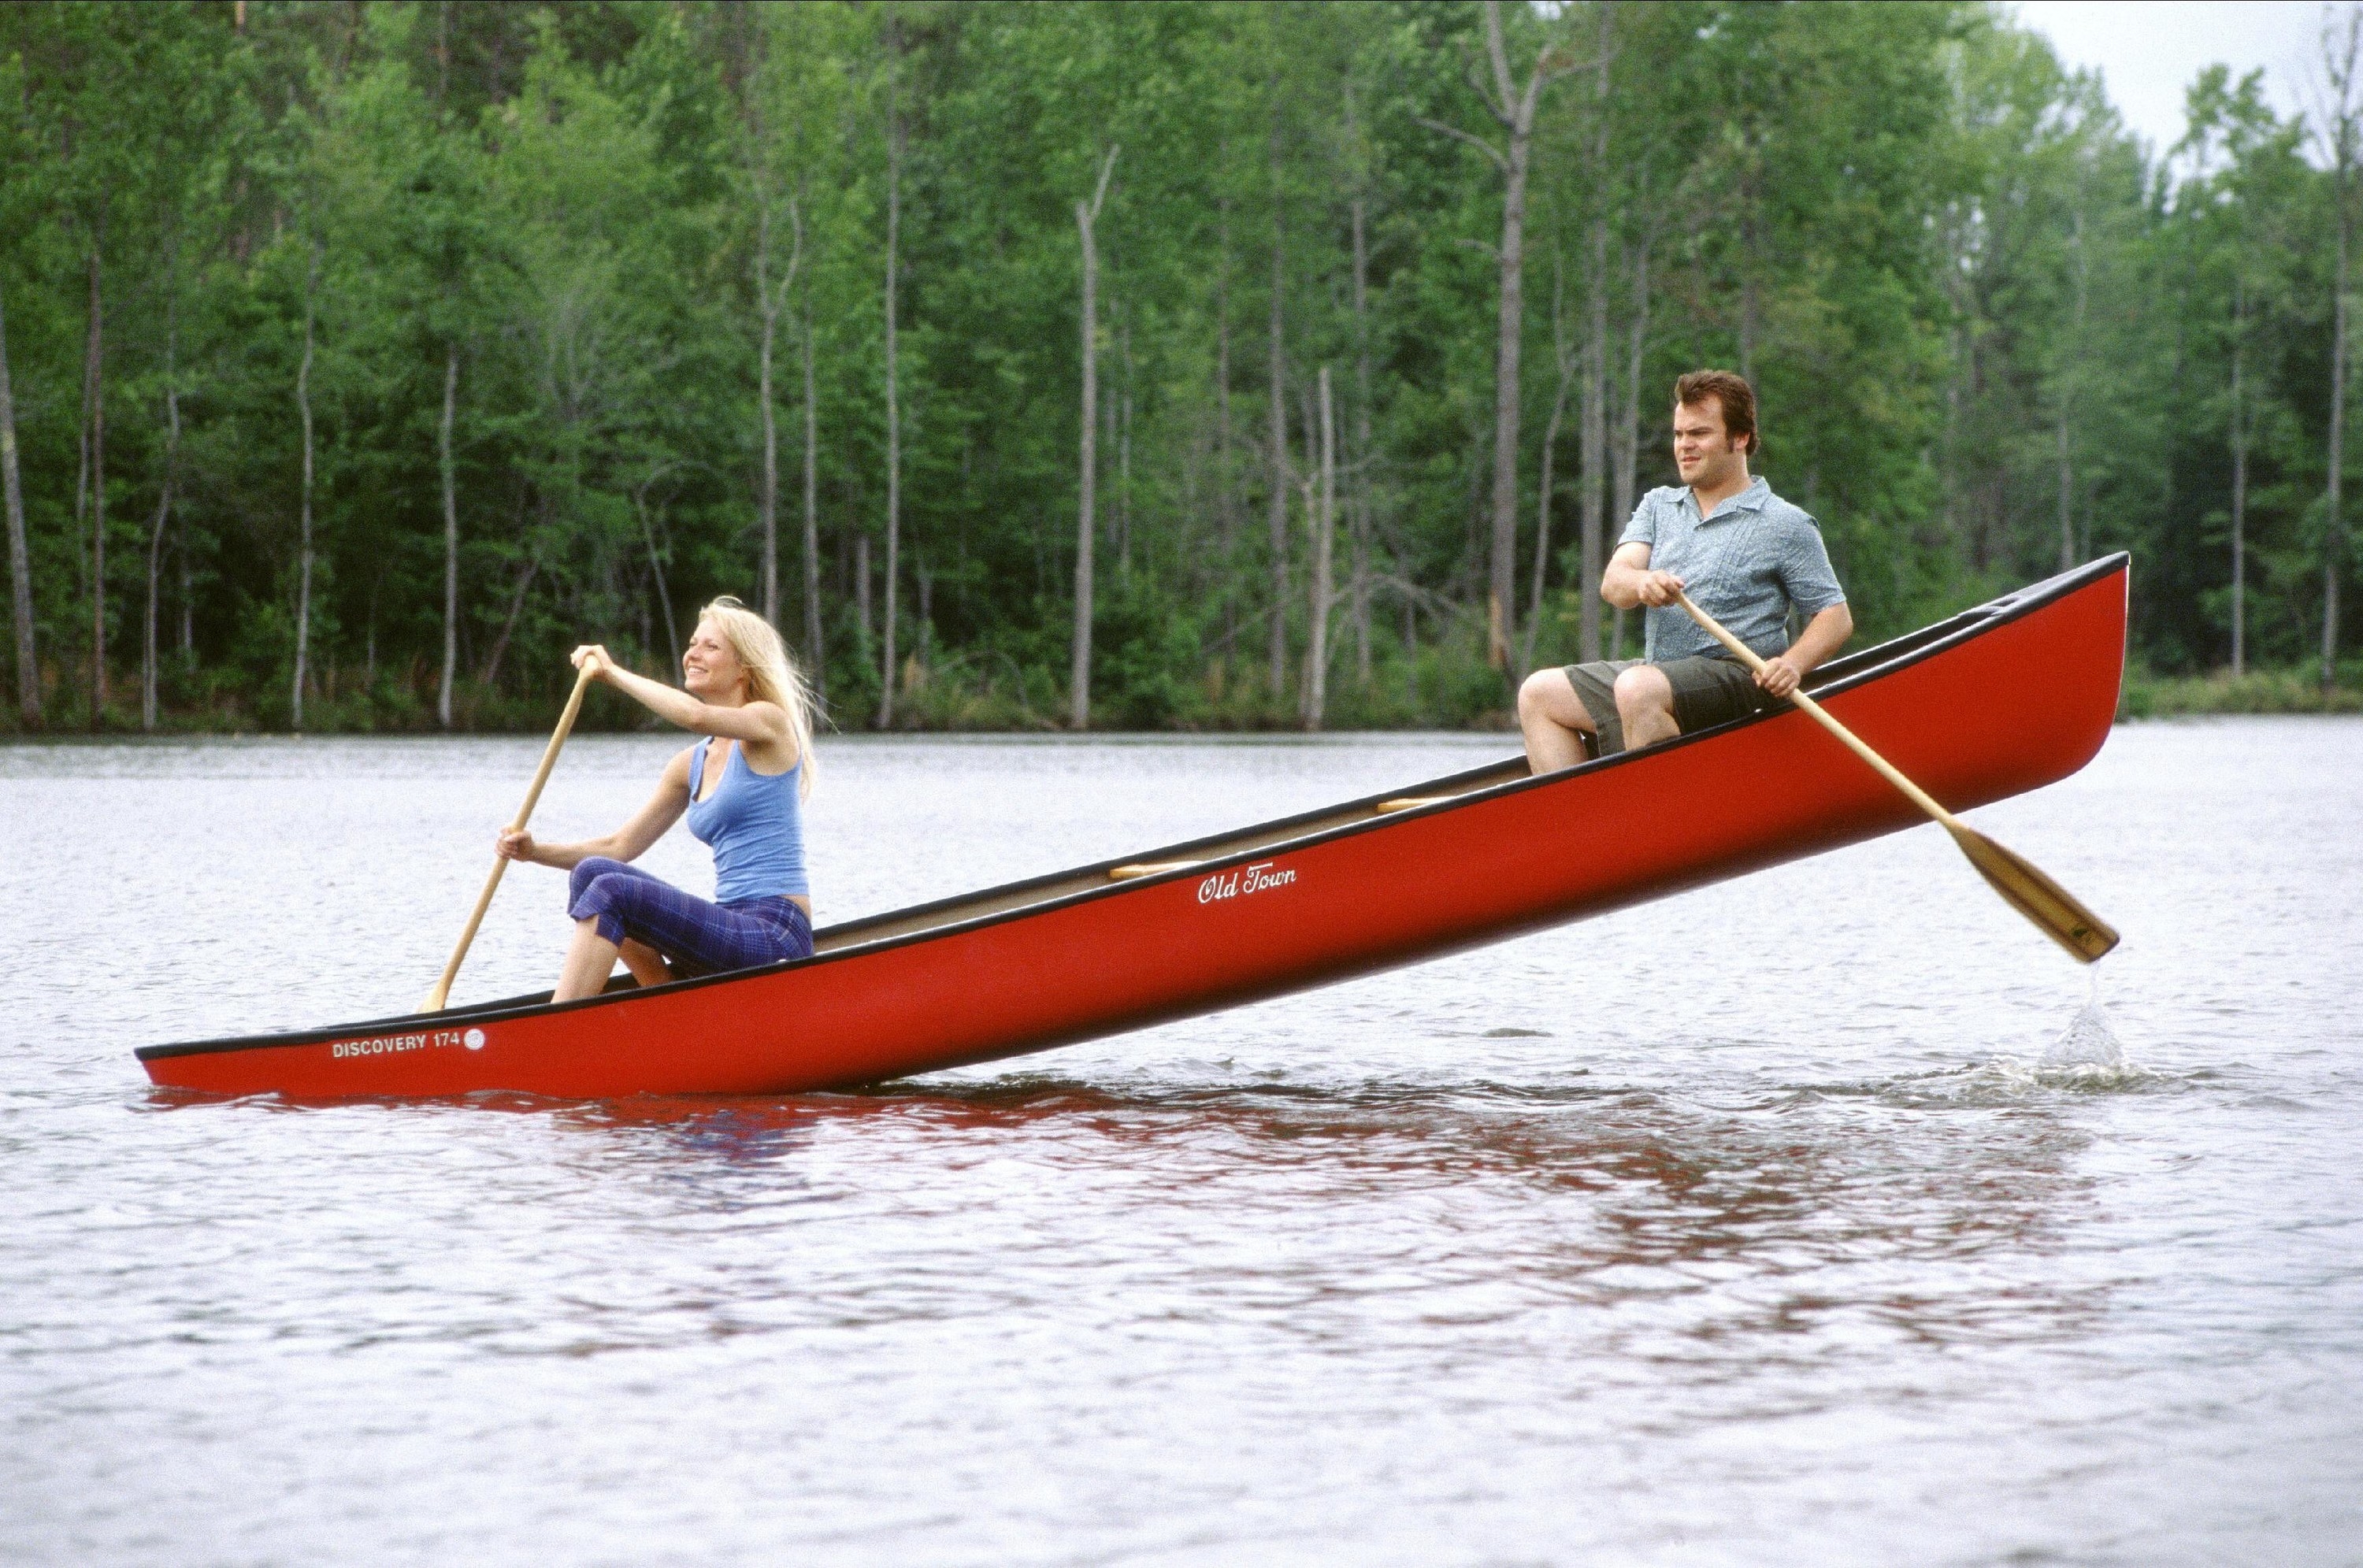 A woman paddles on a see-saw canoe with her boyfriend in the air